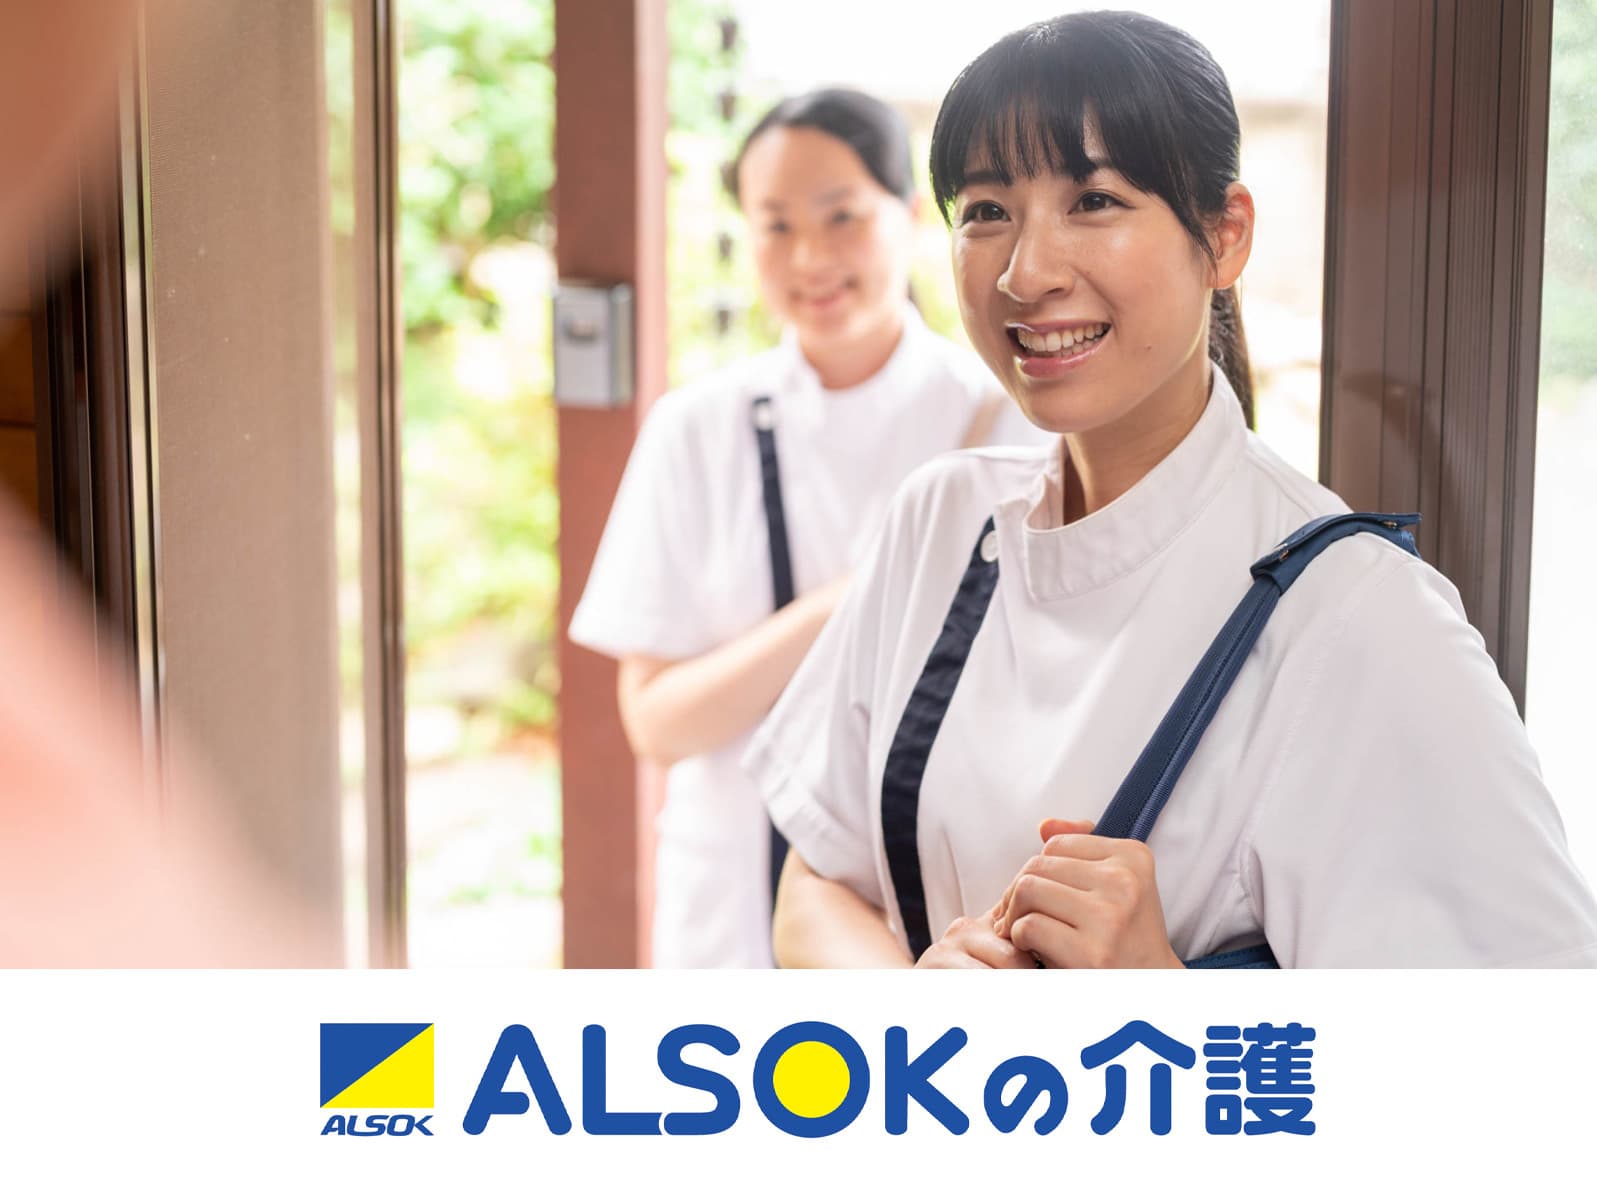 ＡＬＳＯＫ介護株式会社 みんなの家・七里の求人